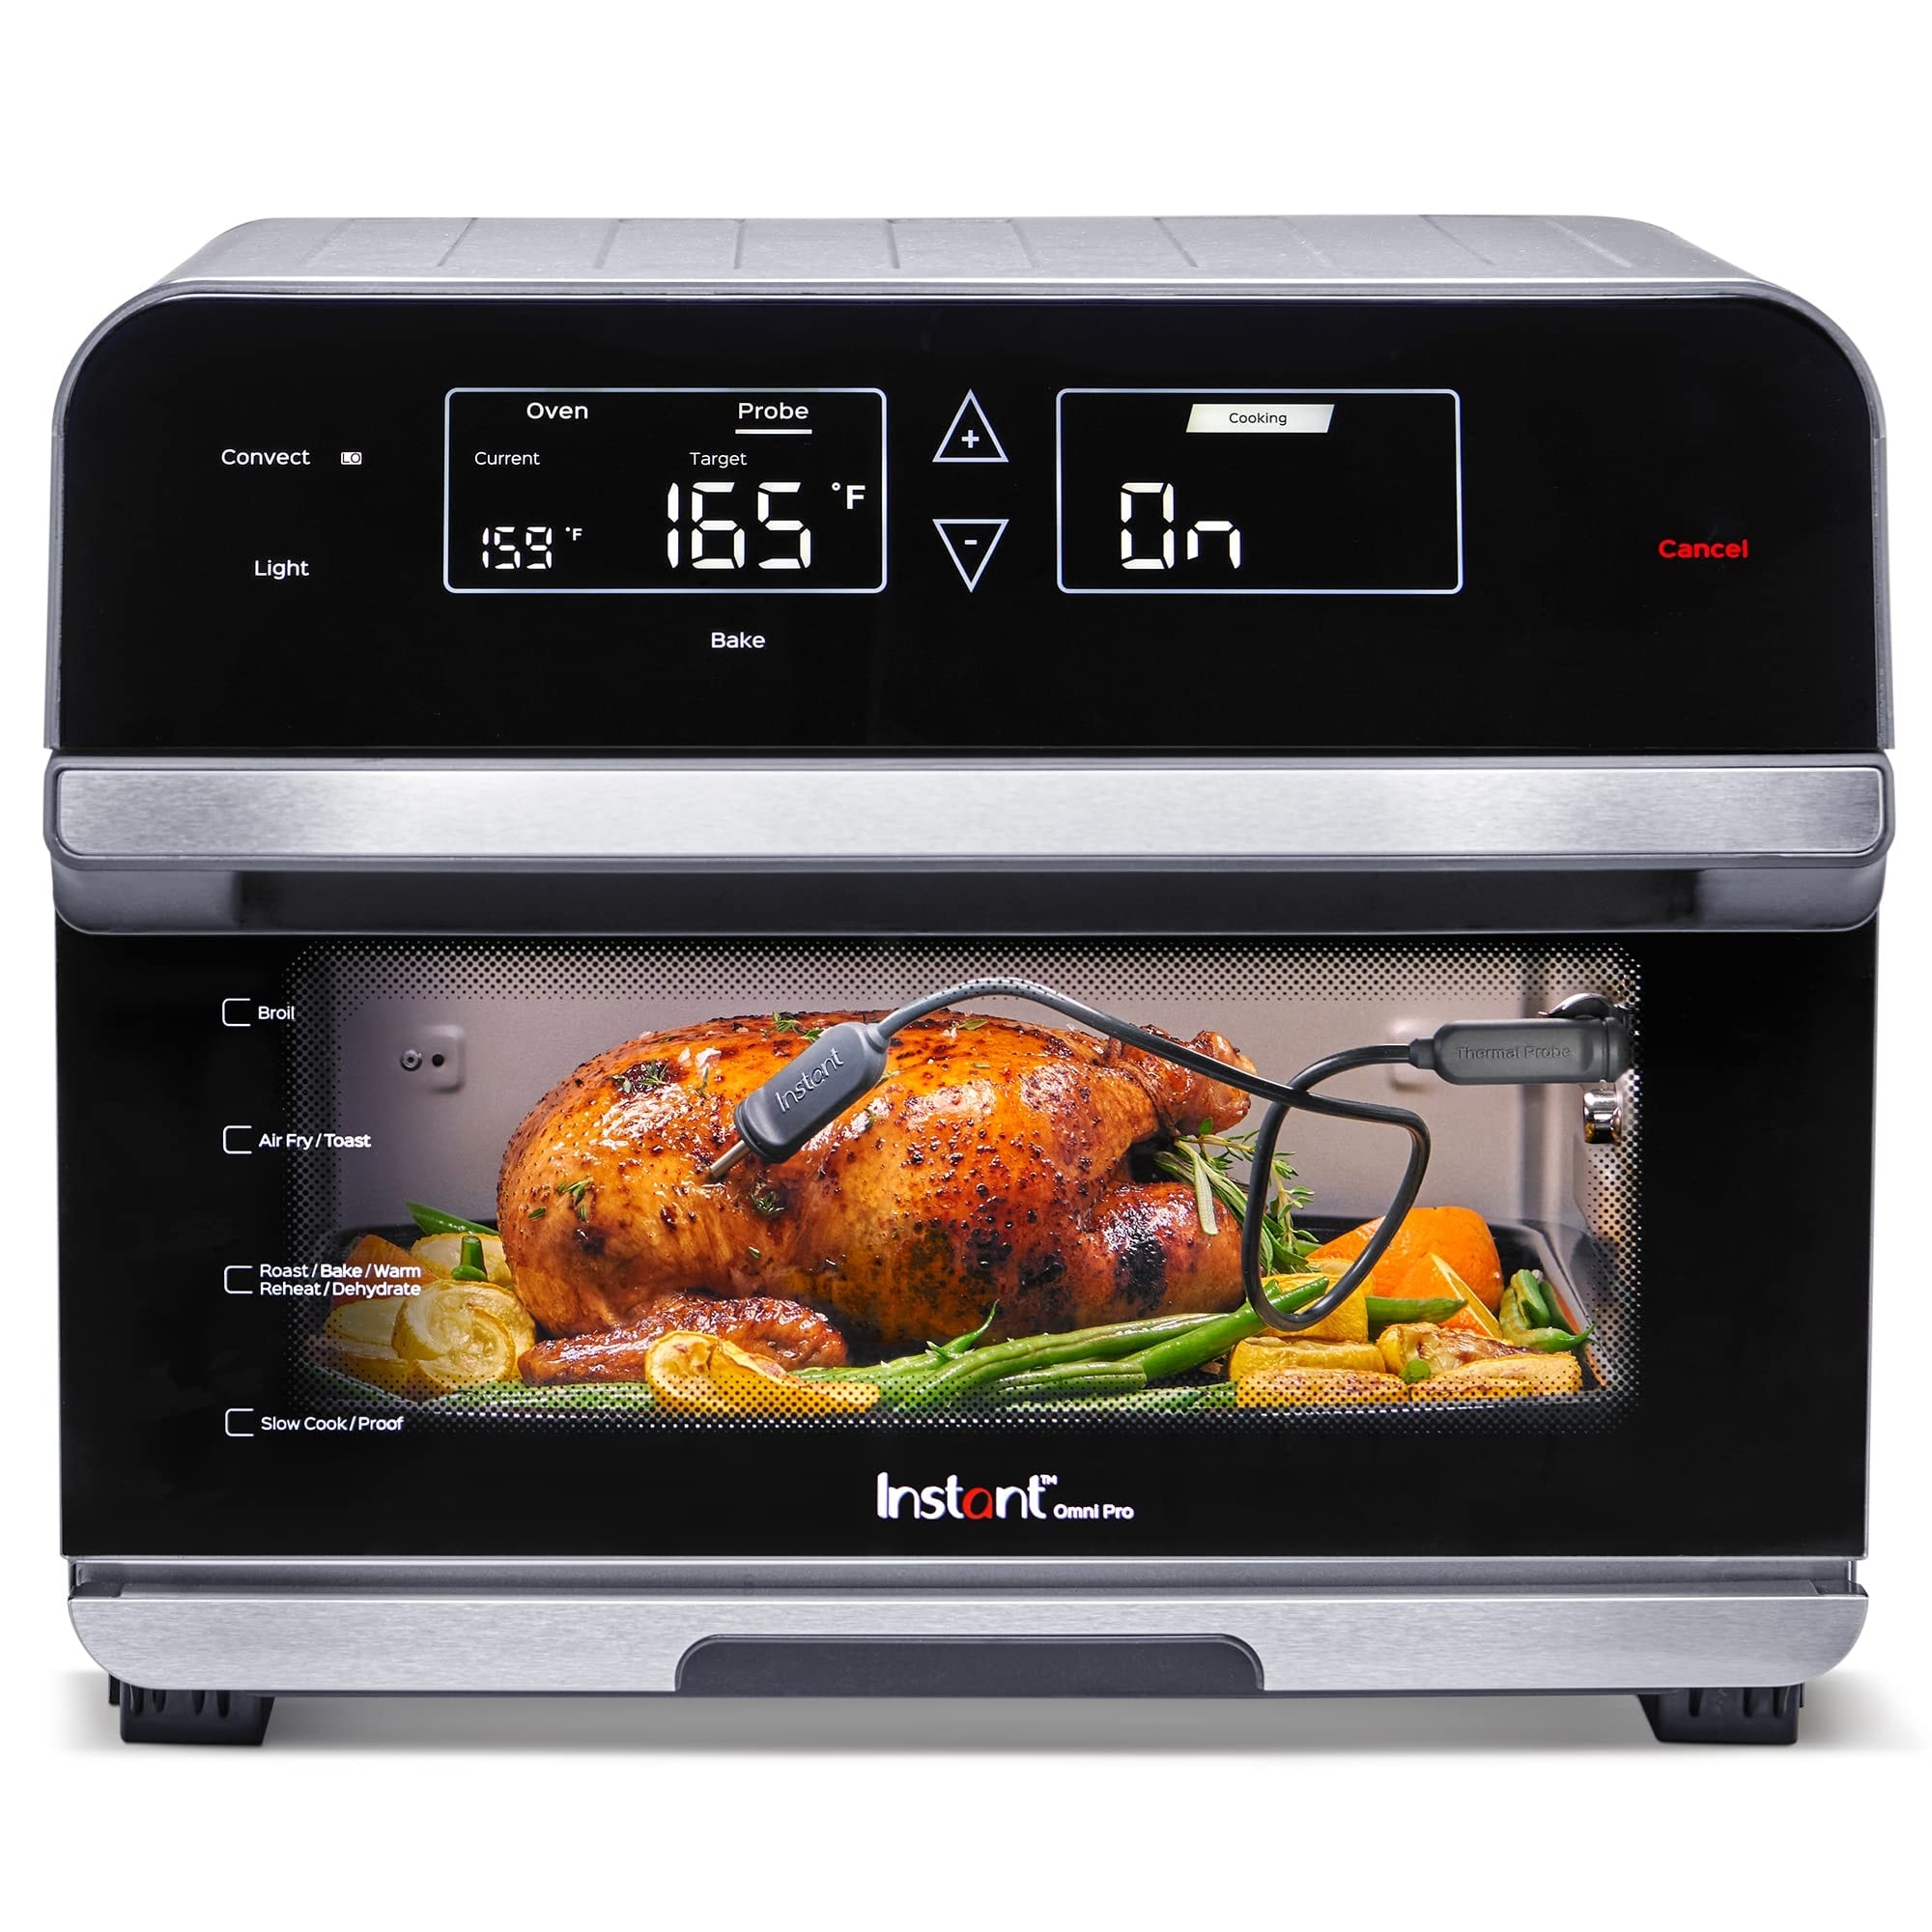 Steam Air Fryer Toaster Oven Combo, 26 QT Steam Convection Oven, 6 Slice  Toast, Stainless Steel